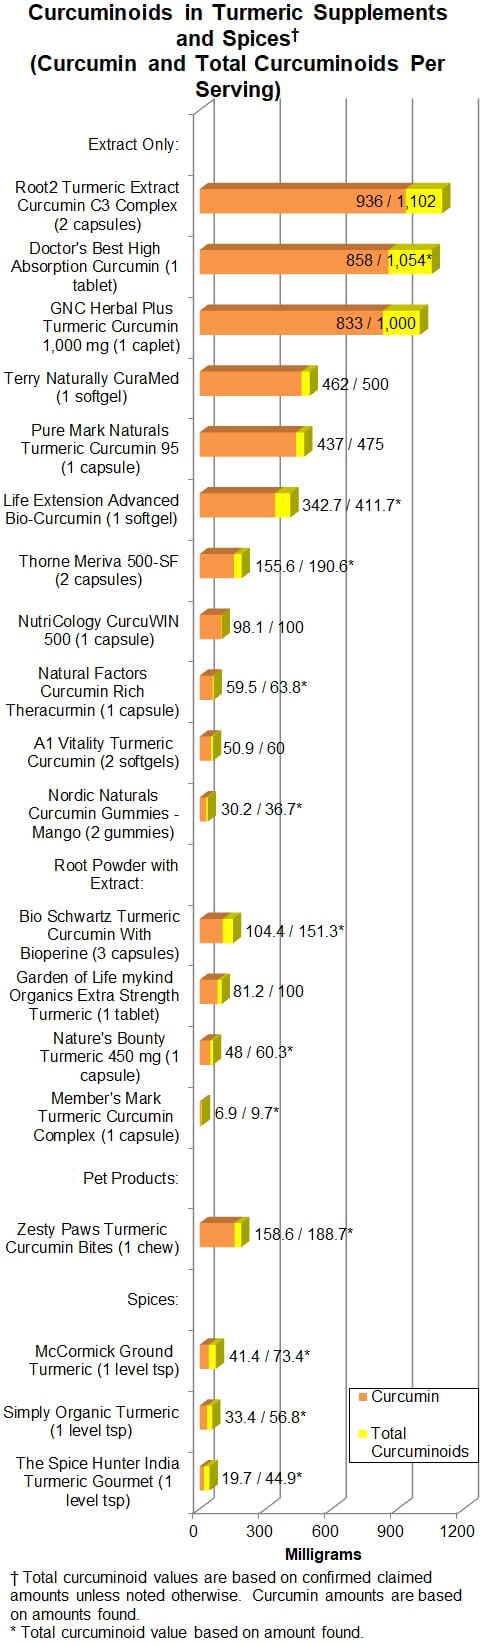 Curcuminoids in Turmeric Supplements and Spices